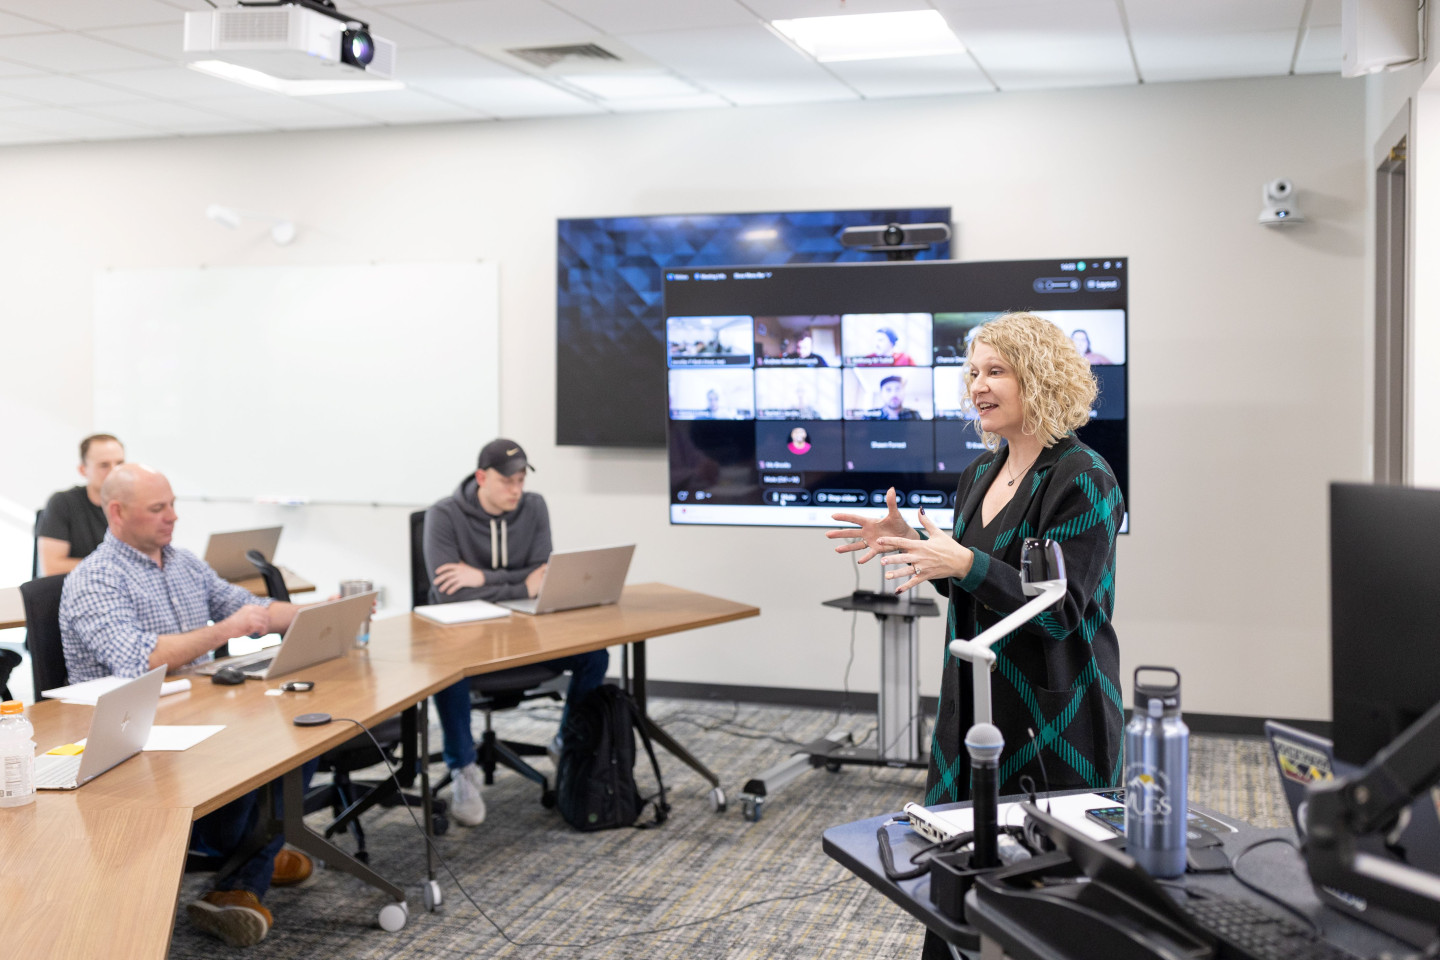 Dr. Jennifer Bott teaches a course with students attending online and in person